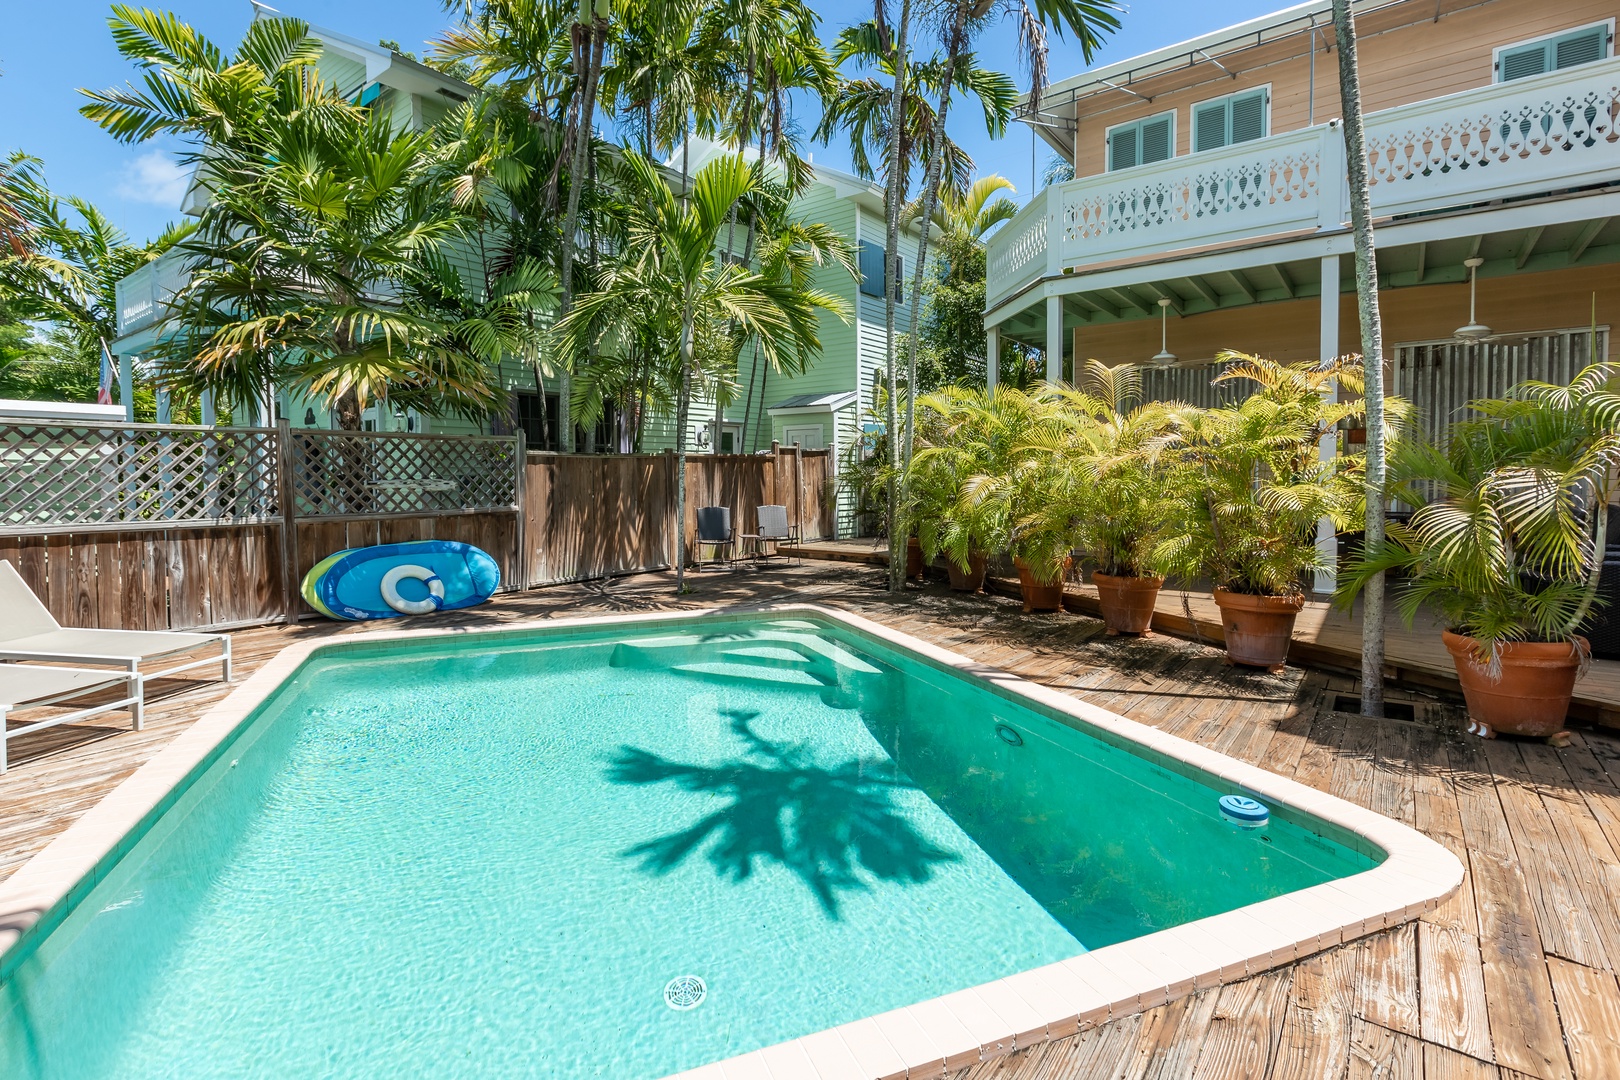 Seabreeze Delight shared pool